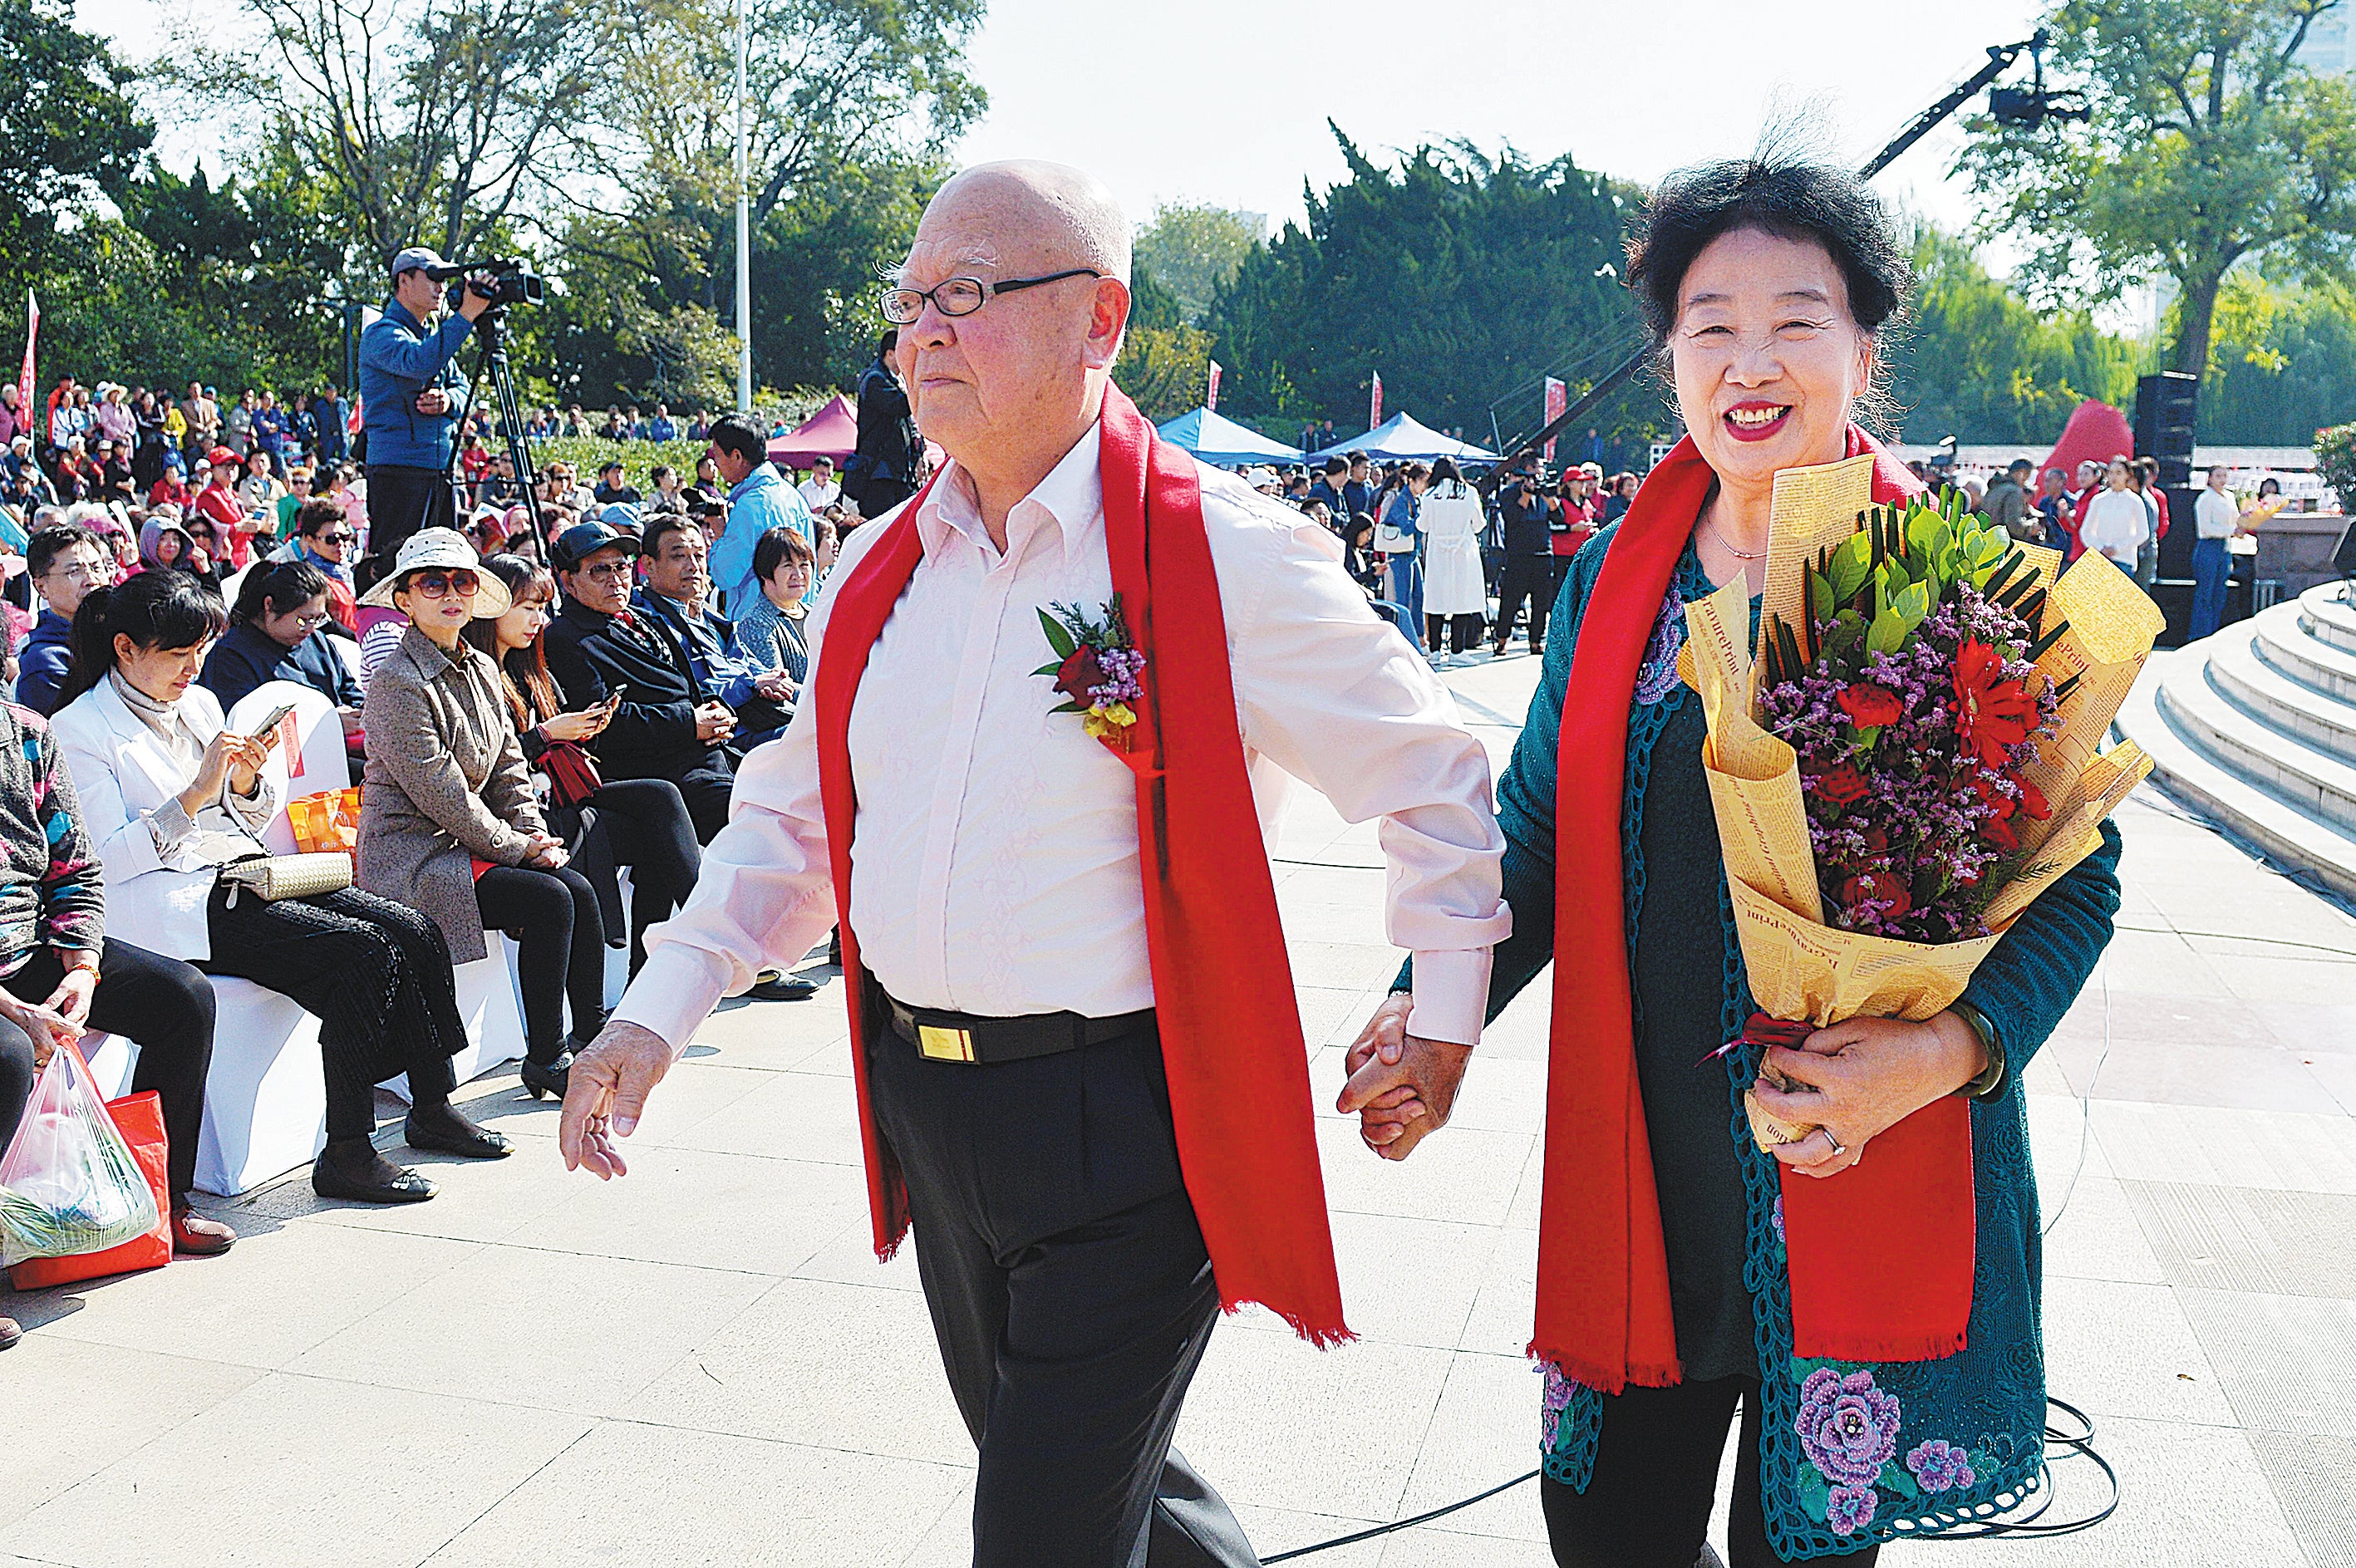 A newly married couple walk hand in hand in a group wedding in Qingdao, Shandong province